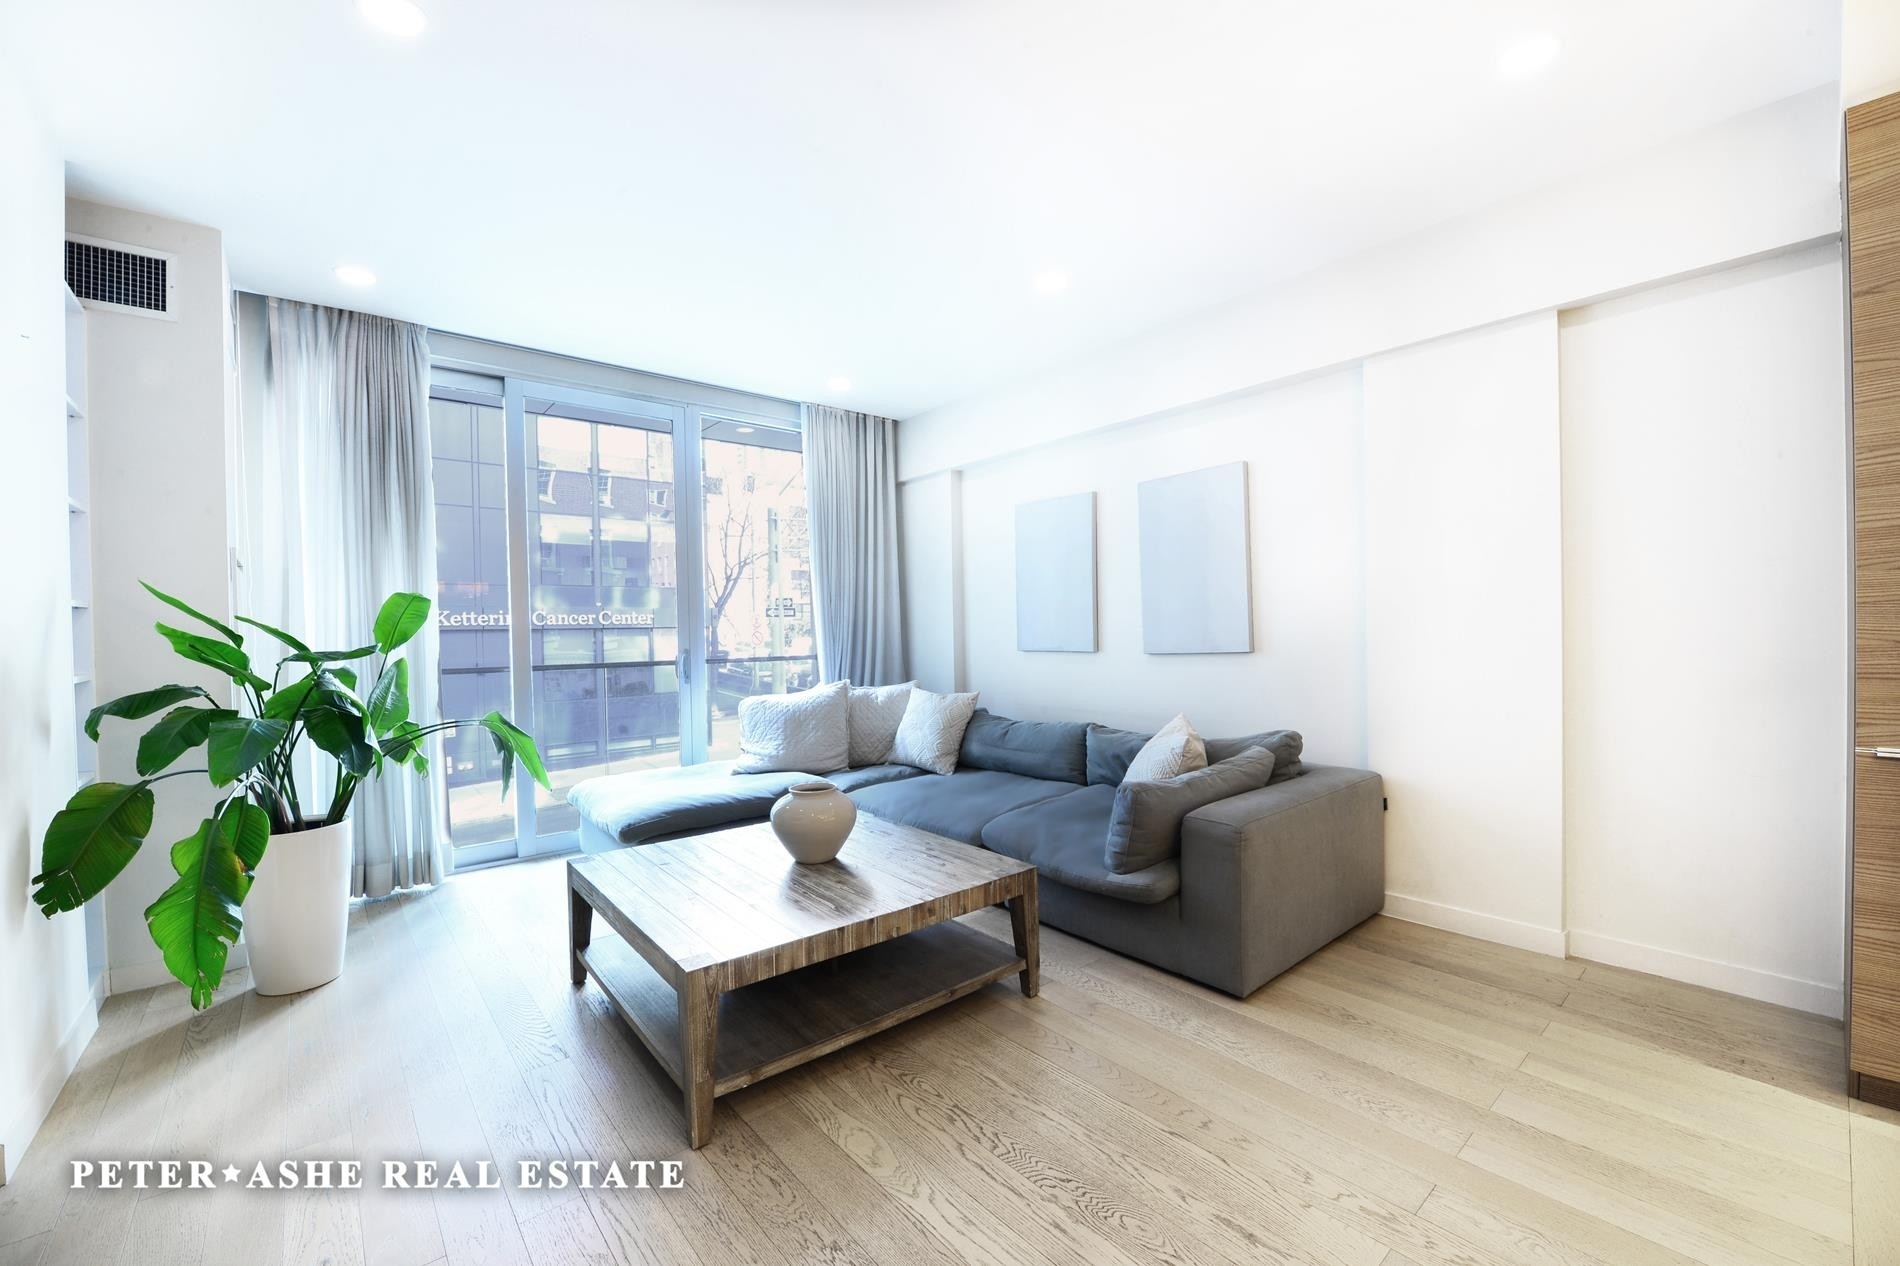 3. Condominiums for Sale at Three Thirty Seven, 337 E 62ND ST, 2A Lenox Hill, New York, New York 10065